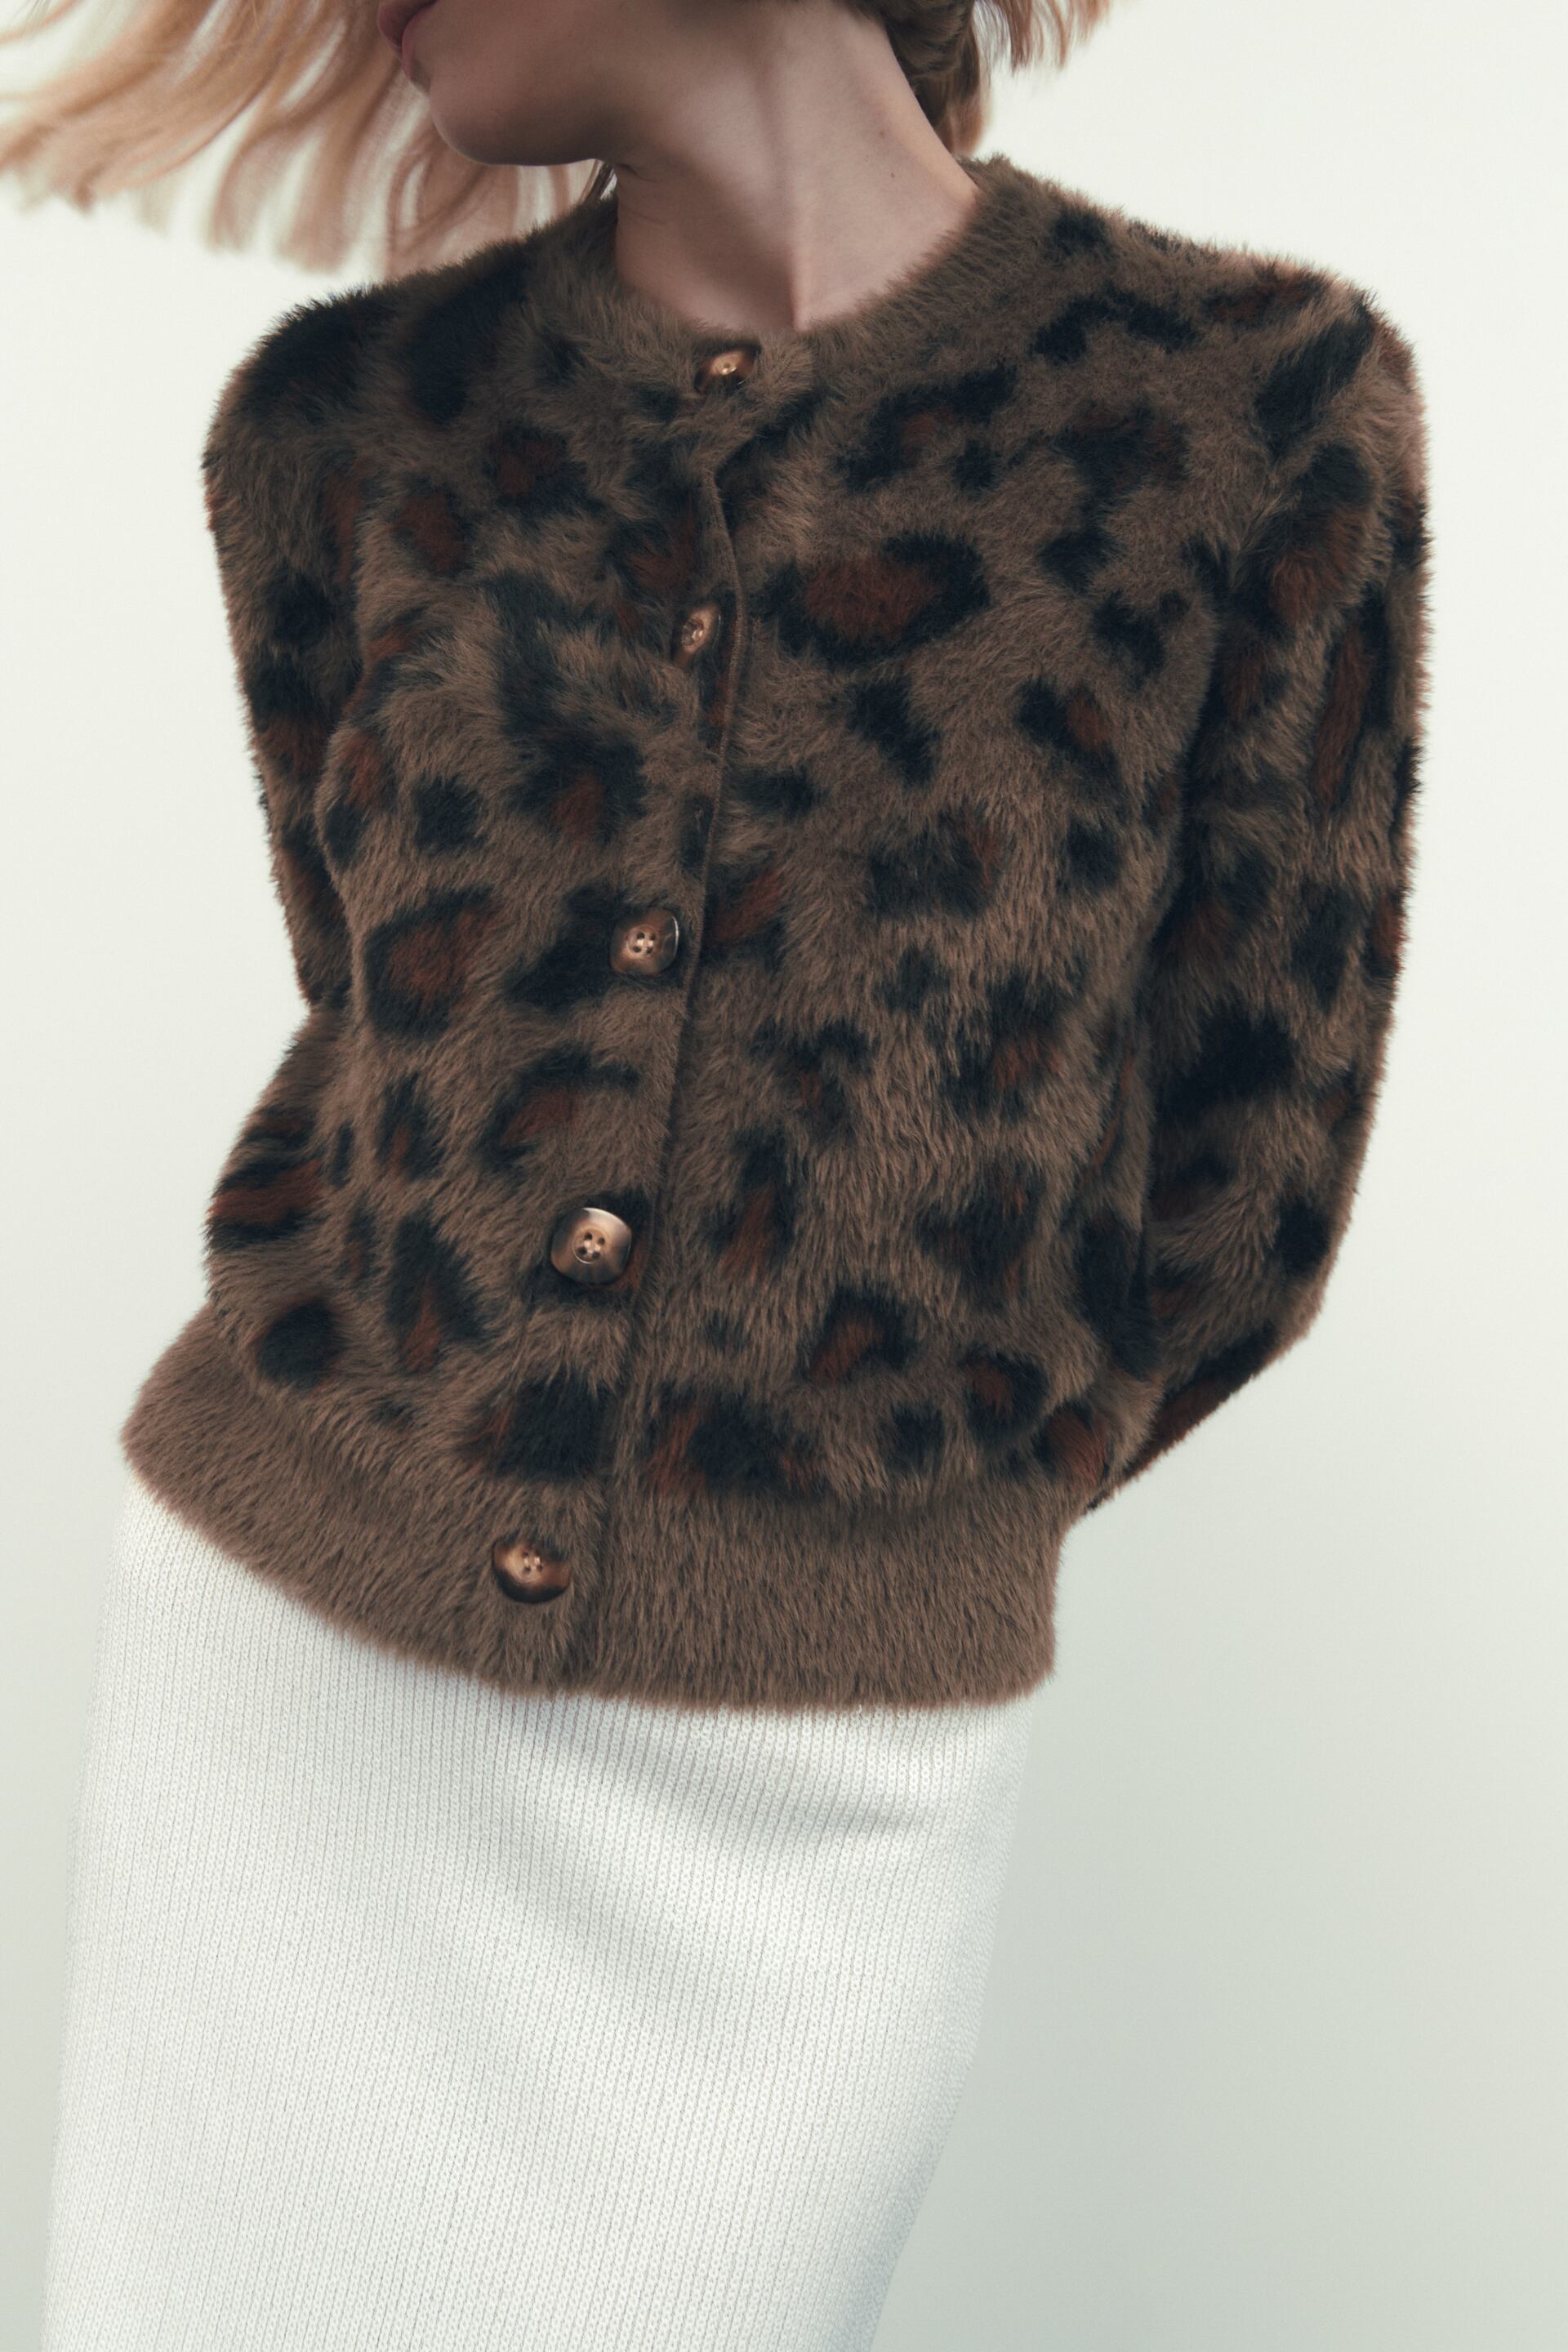 not to mention chart Receiver ANIMAL PRINT JACQUARD KNIT CARDIGAN - Leopard | ZARA United States